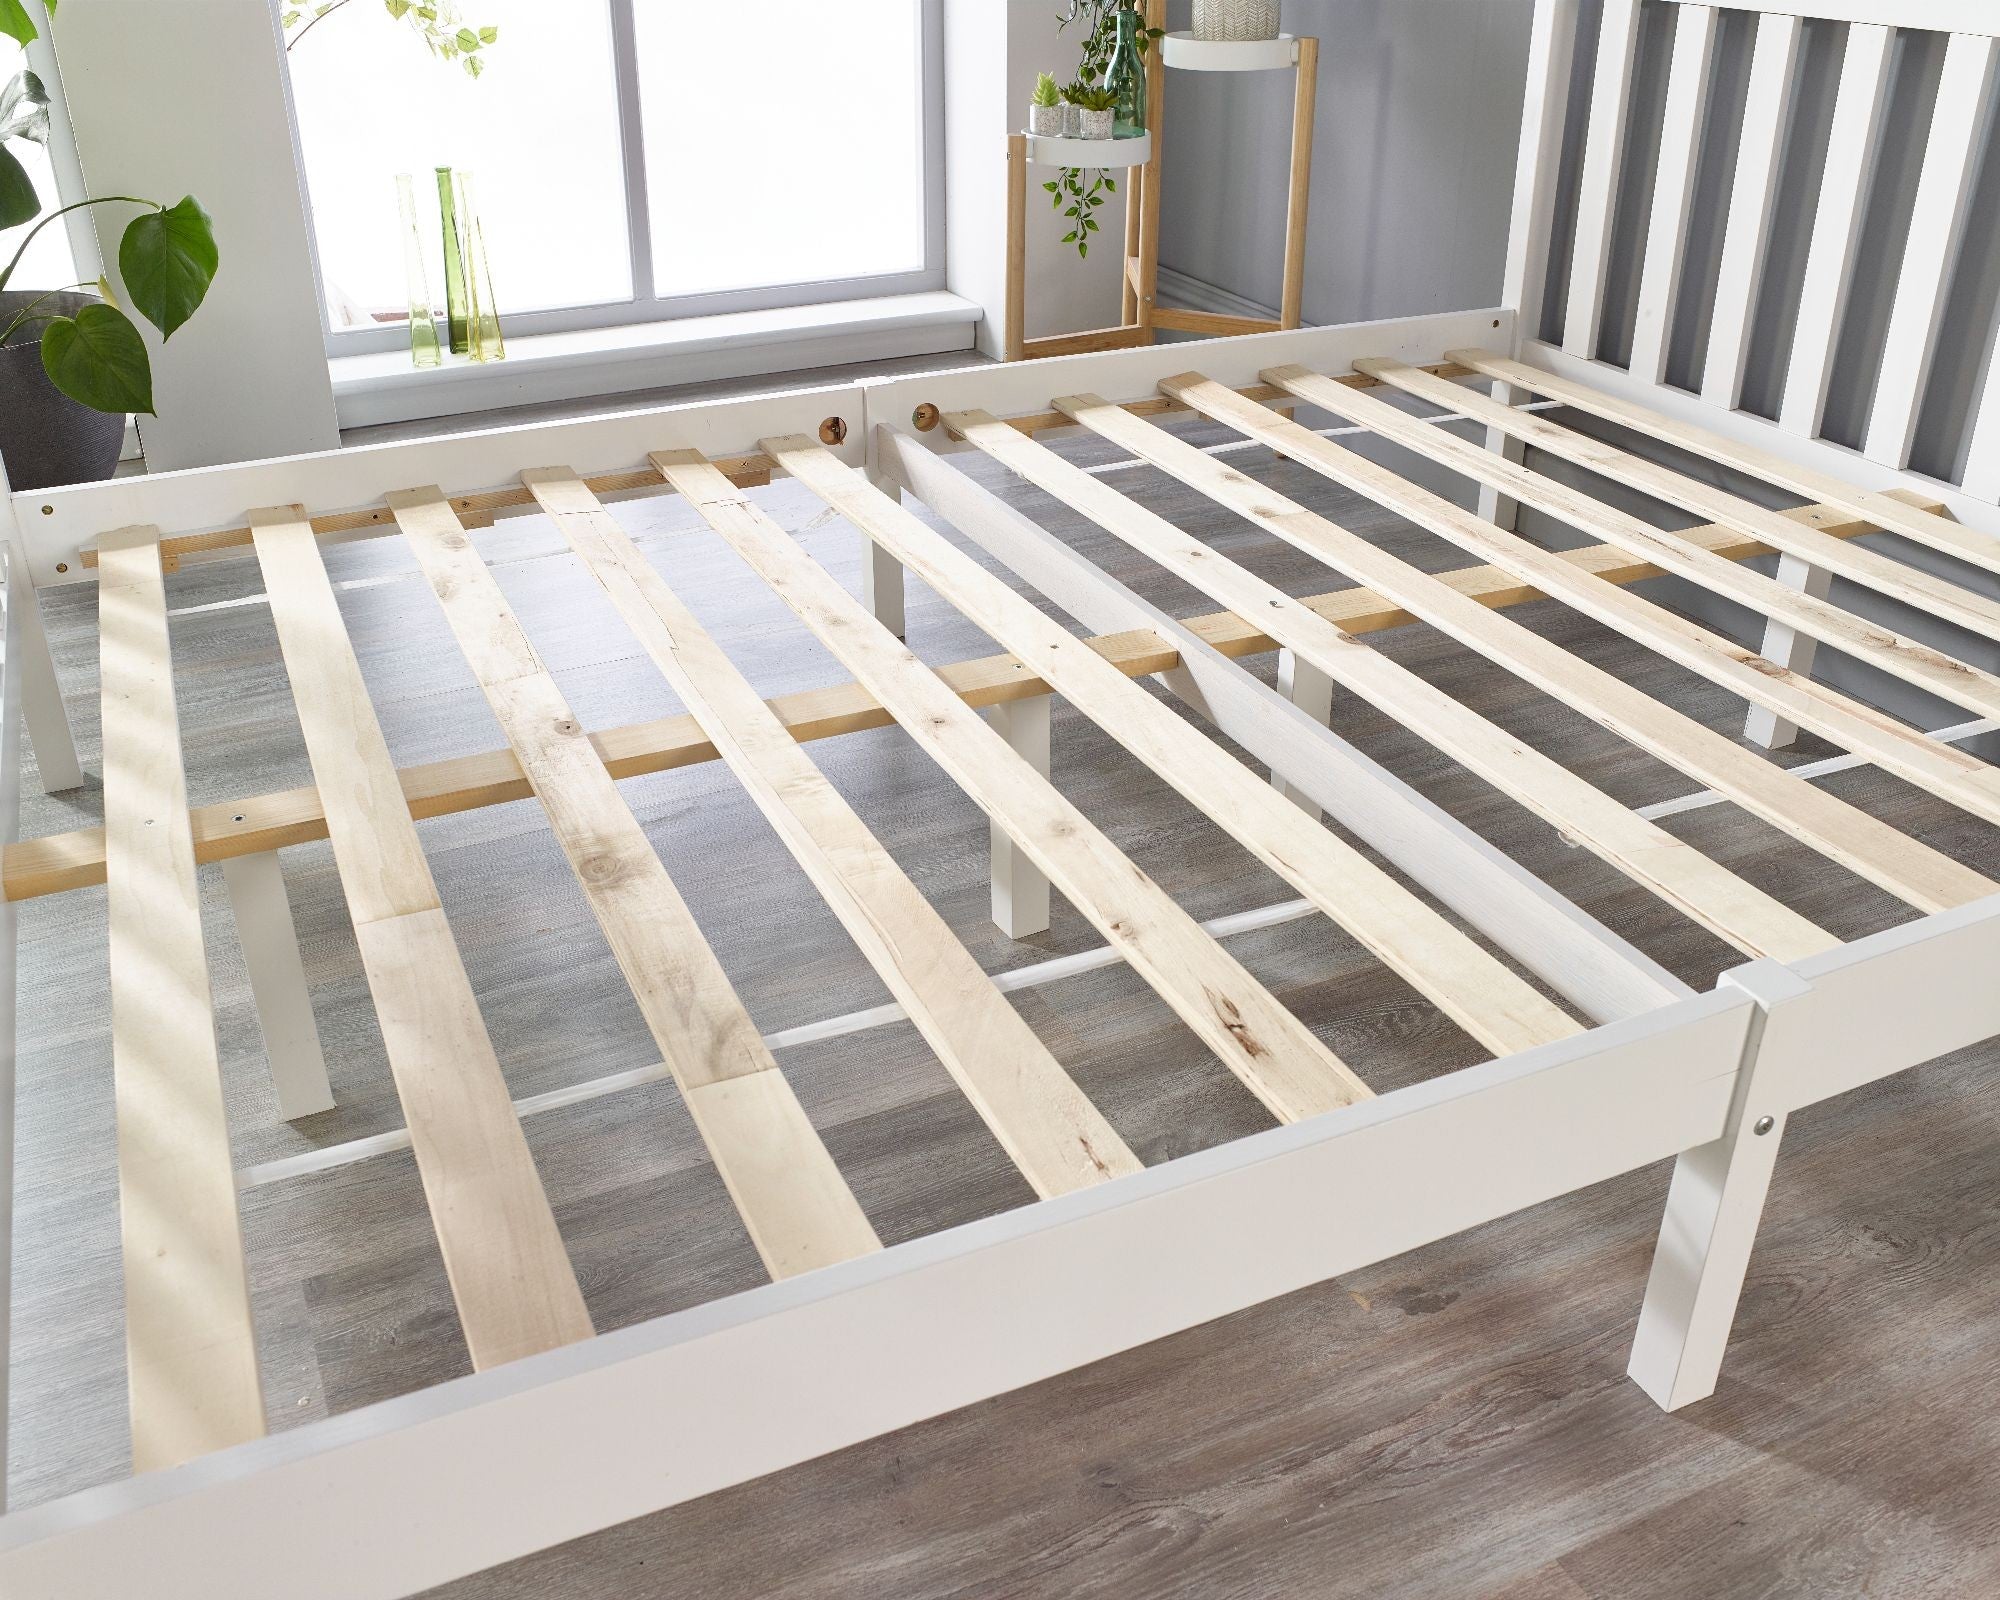 Solid Wood White Bed Frame - Single to Super King Sizes